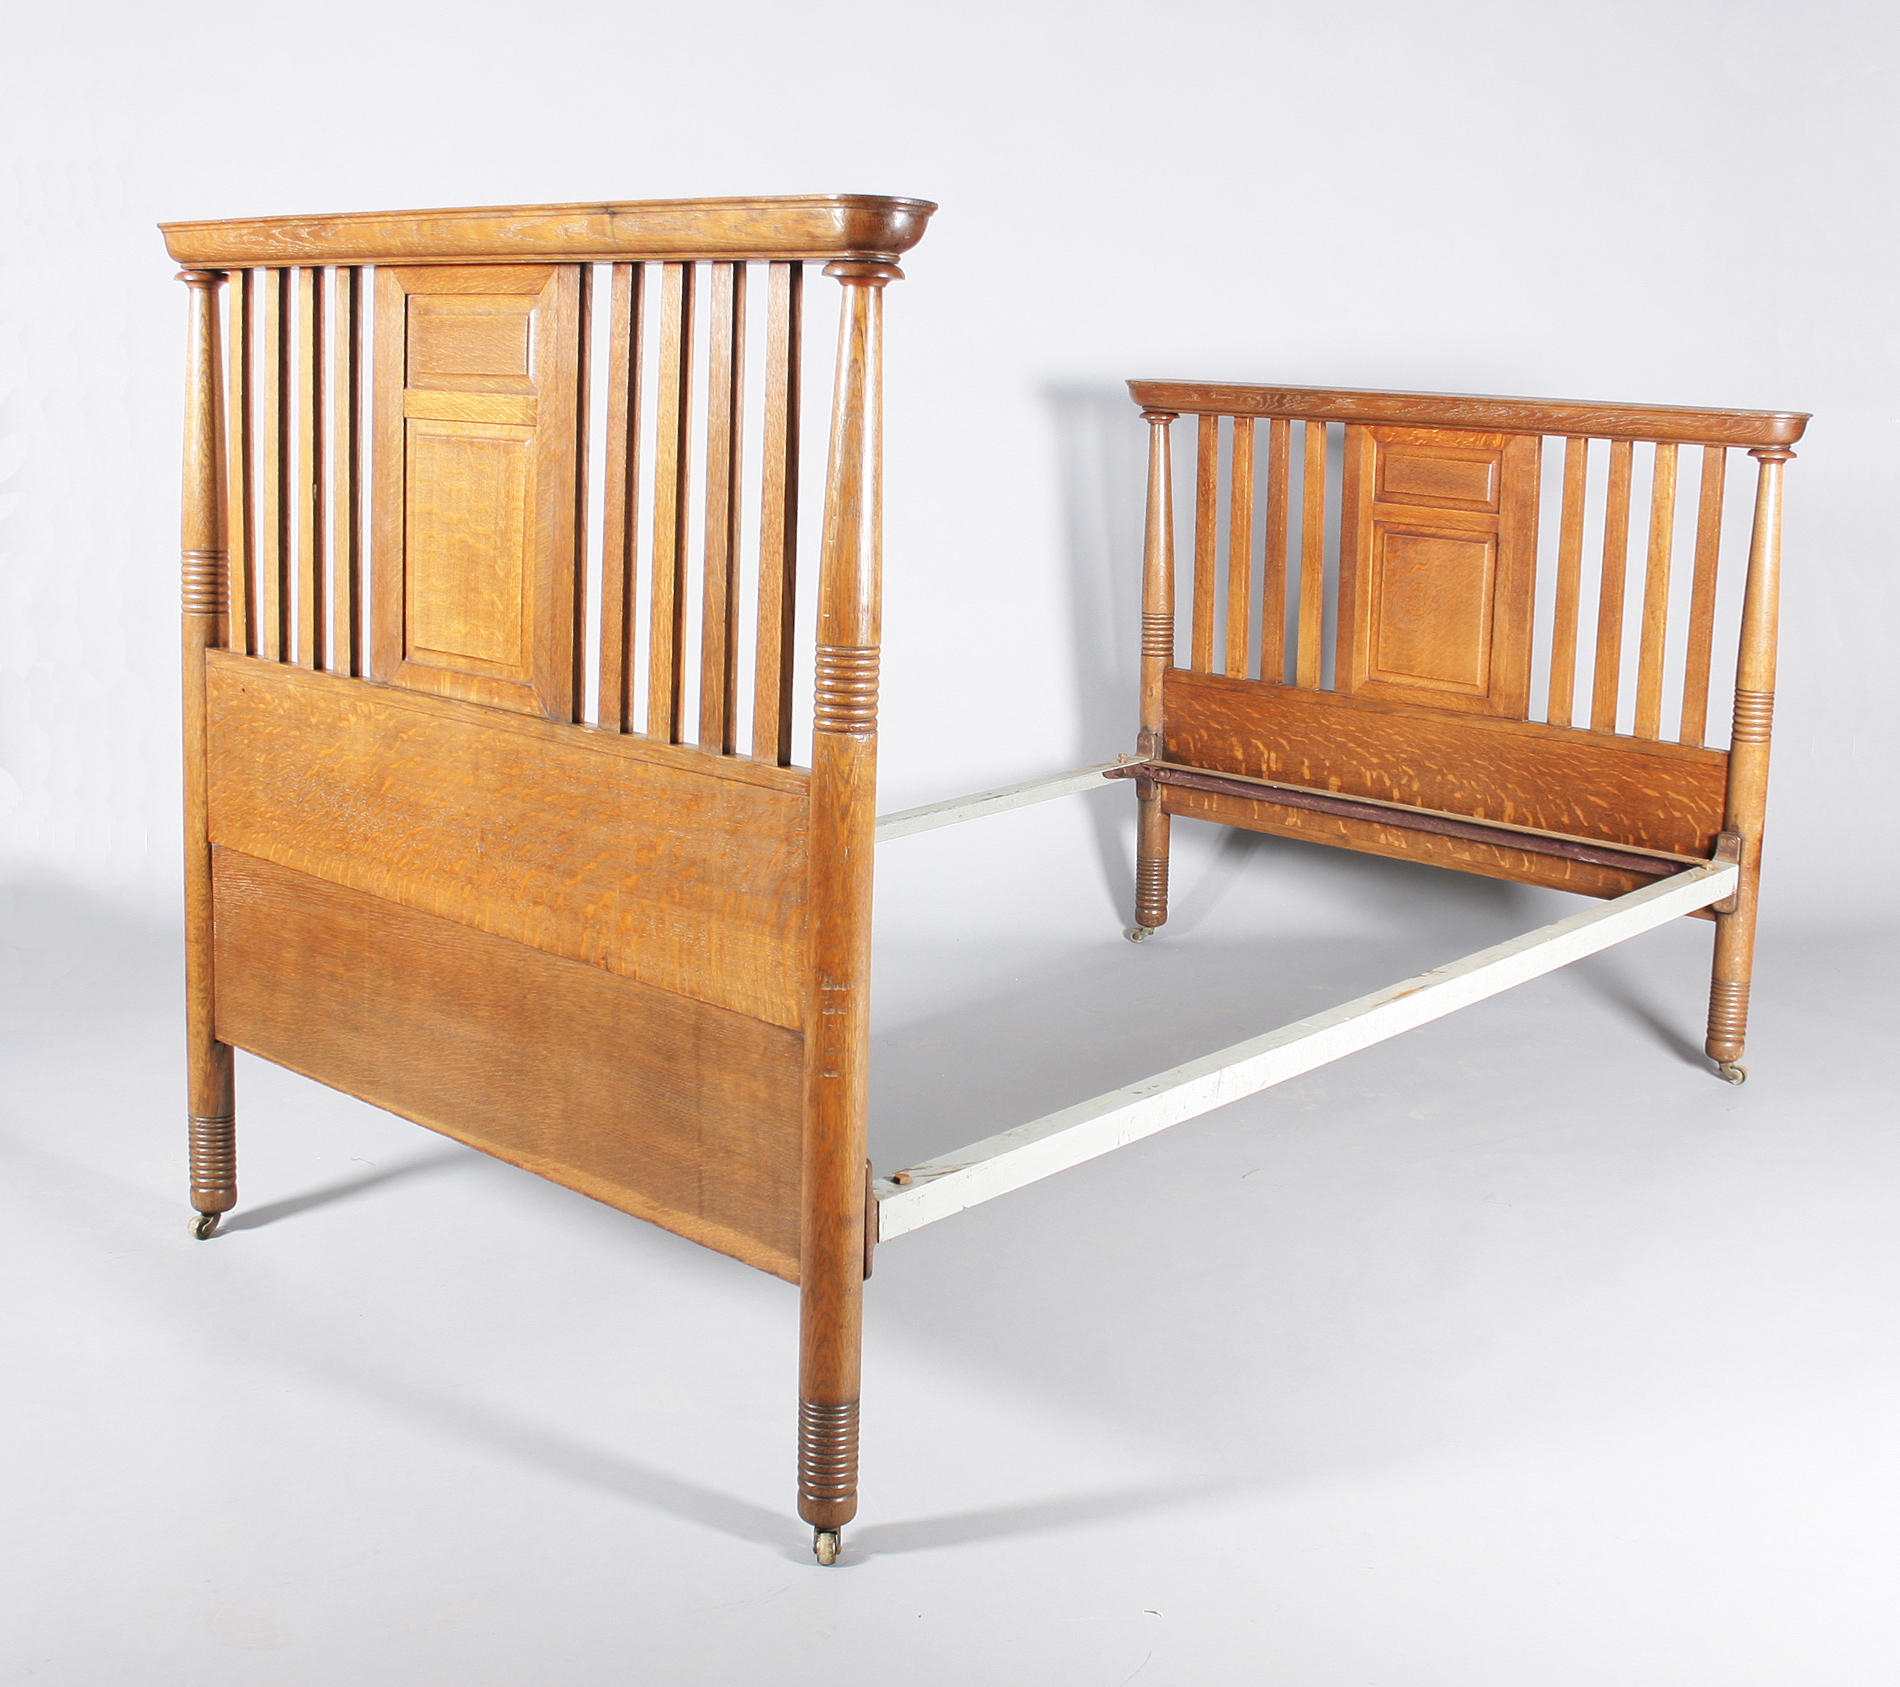 An oak double bed, probably by William Birch, circa 1900